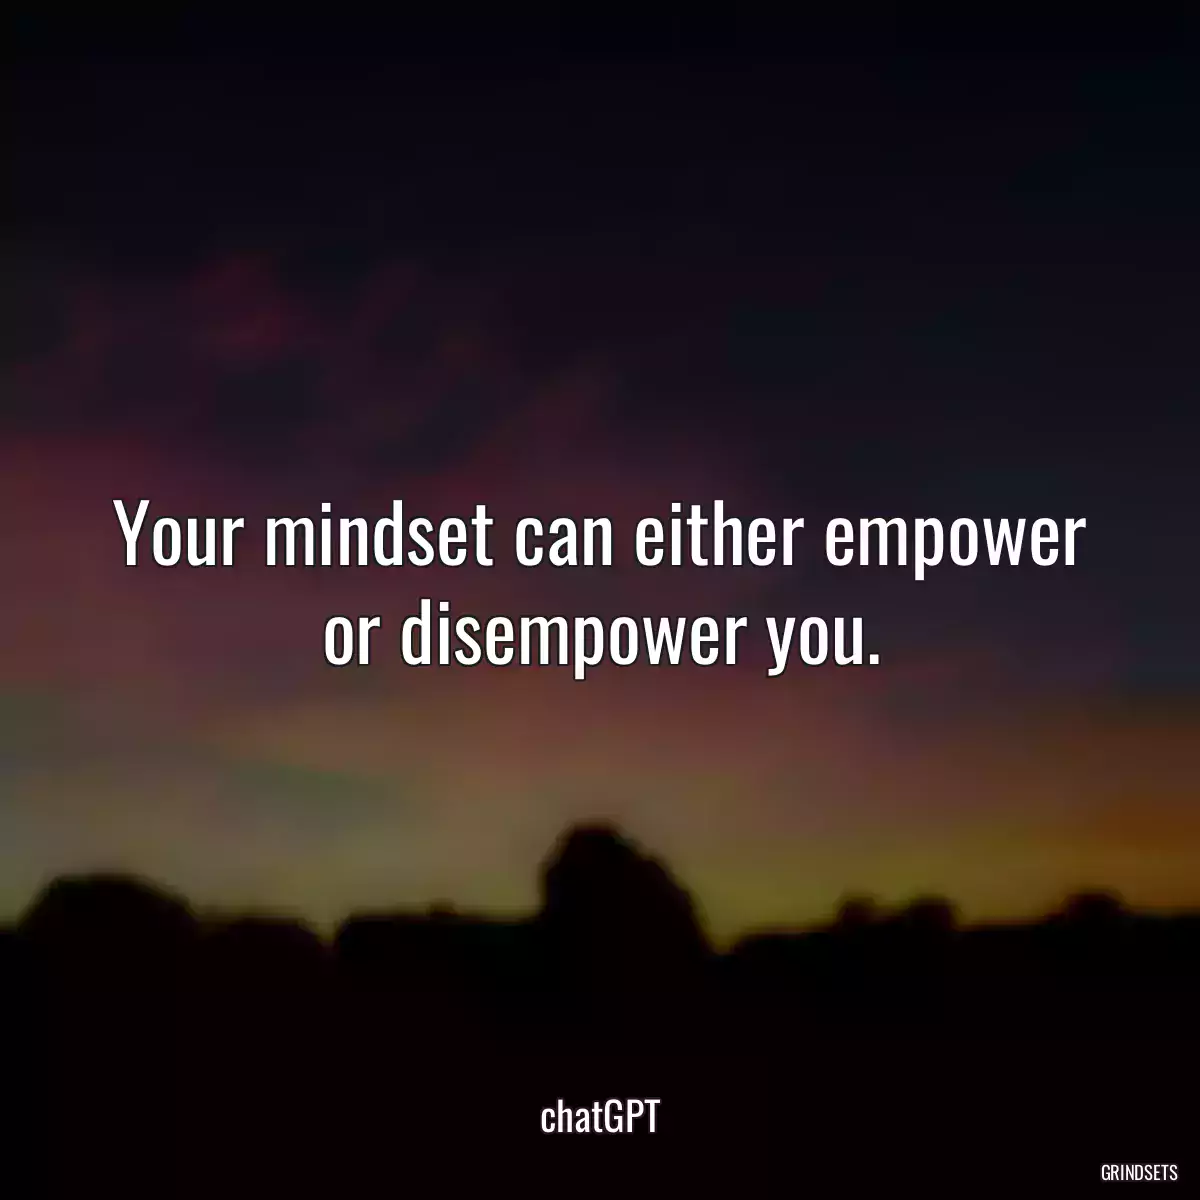 Your mindset can either empower or disempower you.